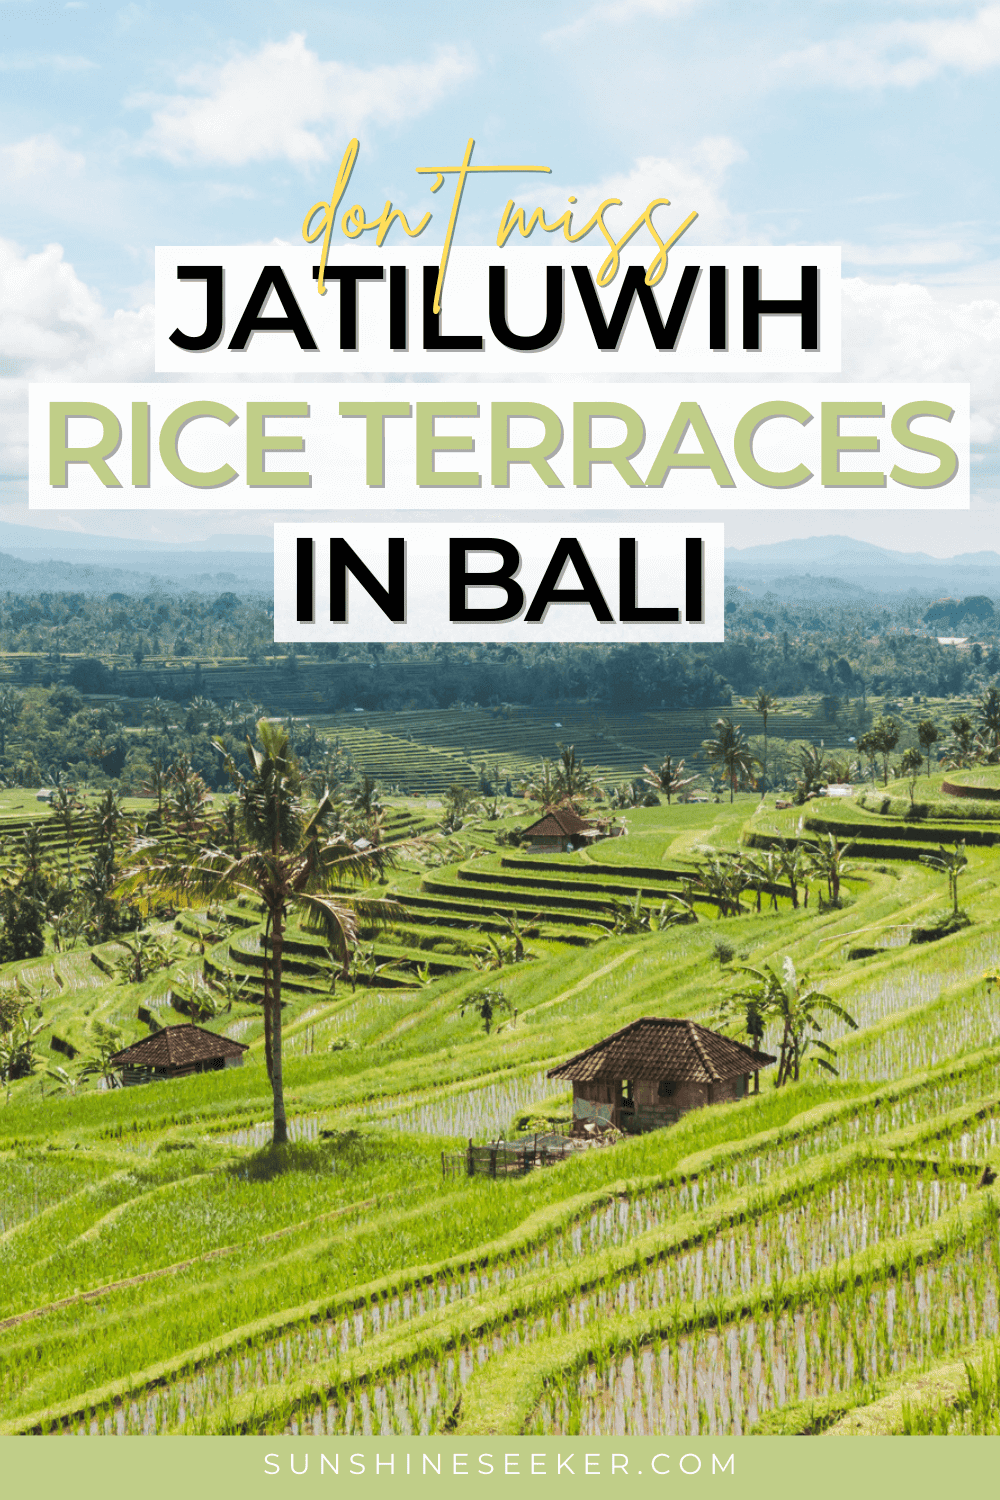 Don't miss the incredible Jatiluwih Rice Terraces while in Bali. A great alternative to the more crowded Tegalalang.